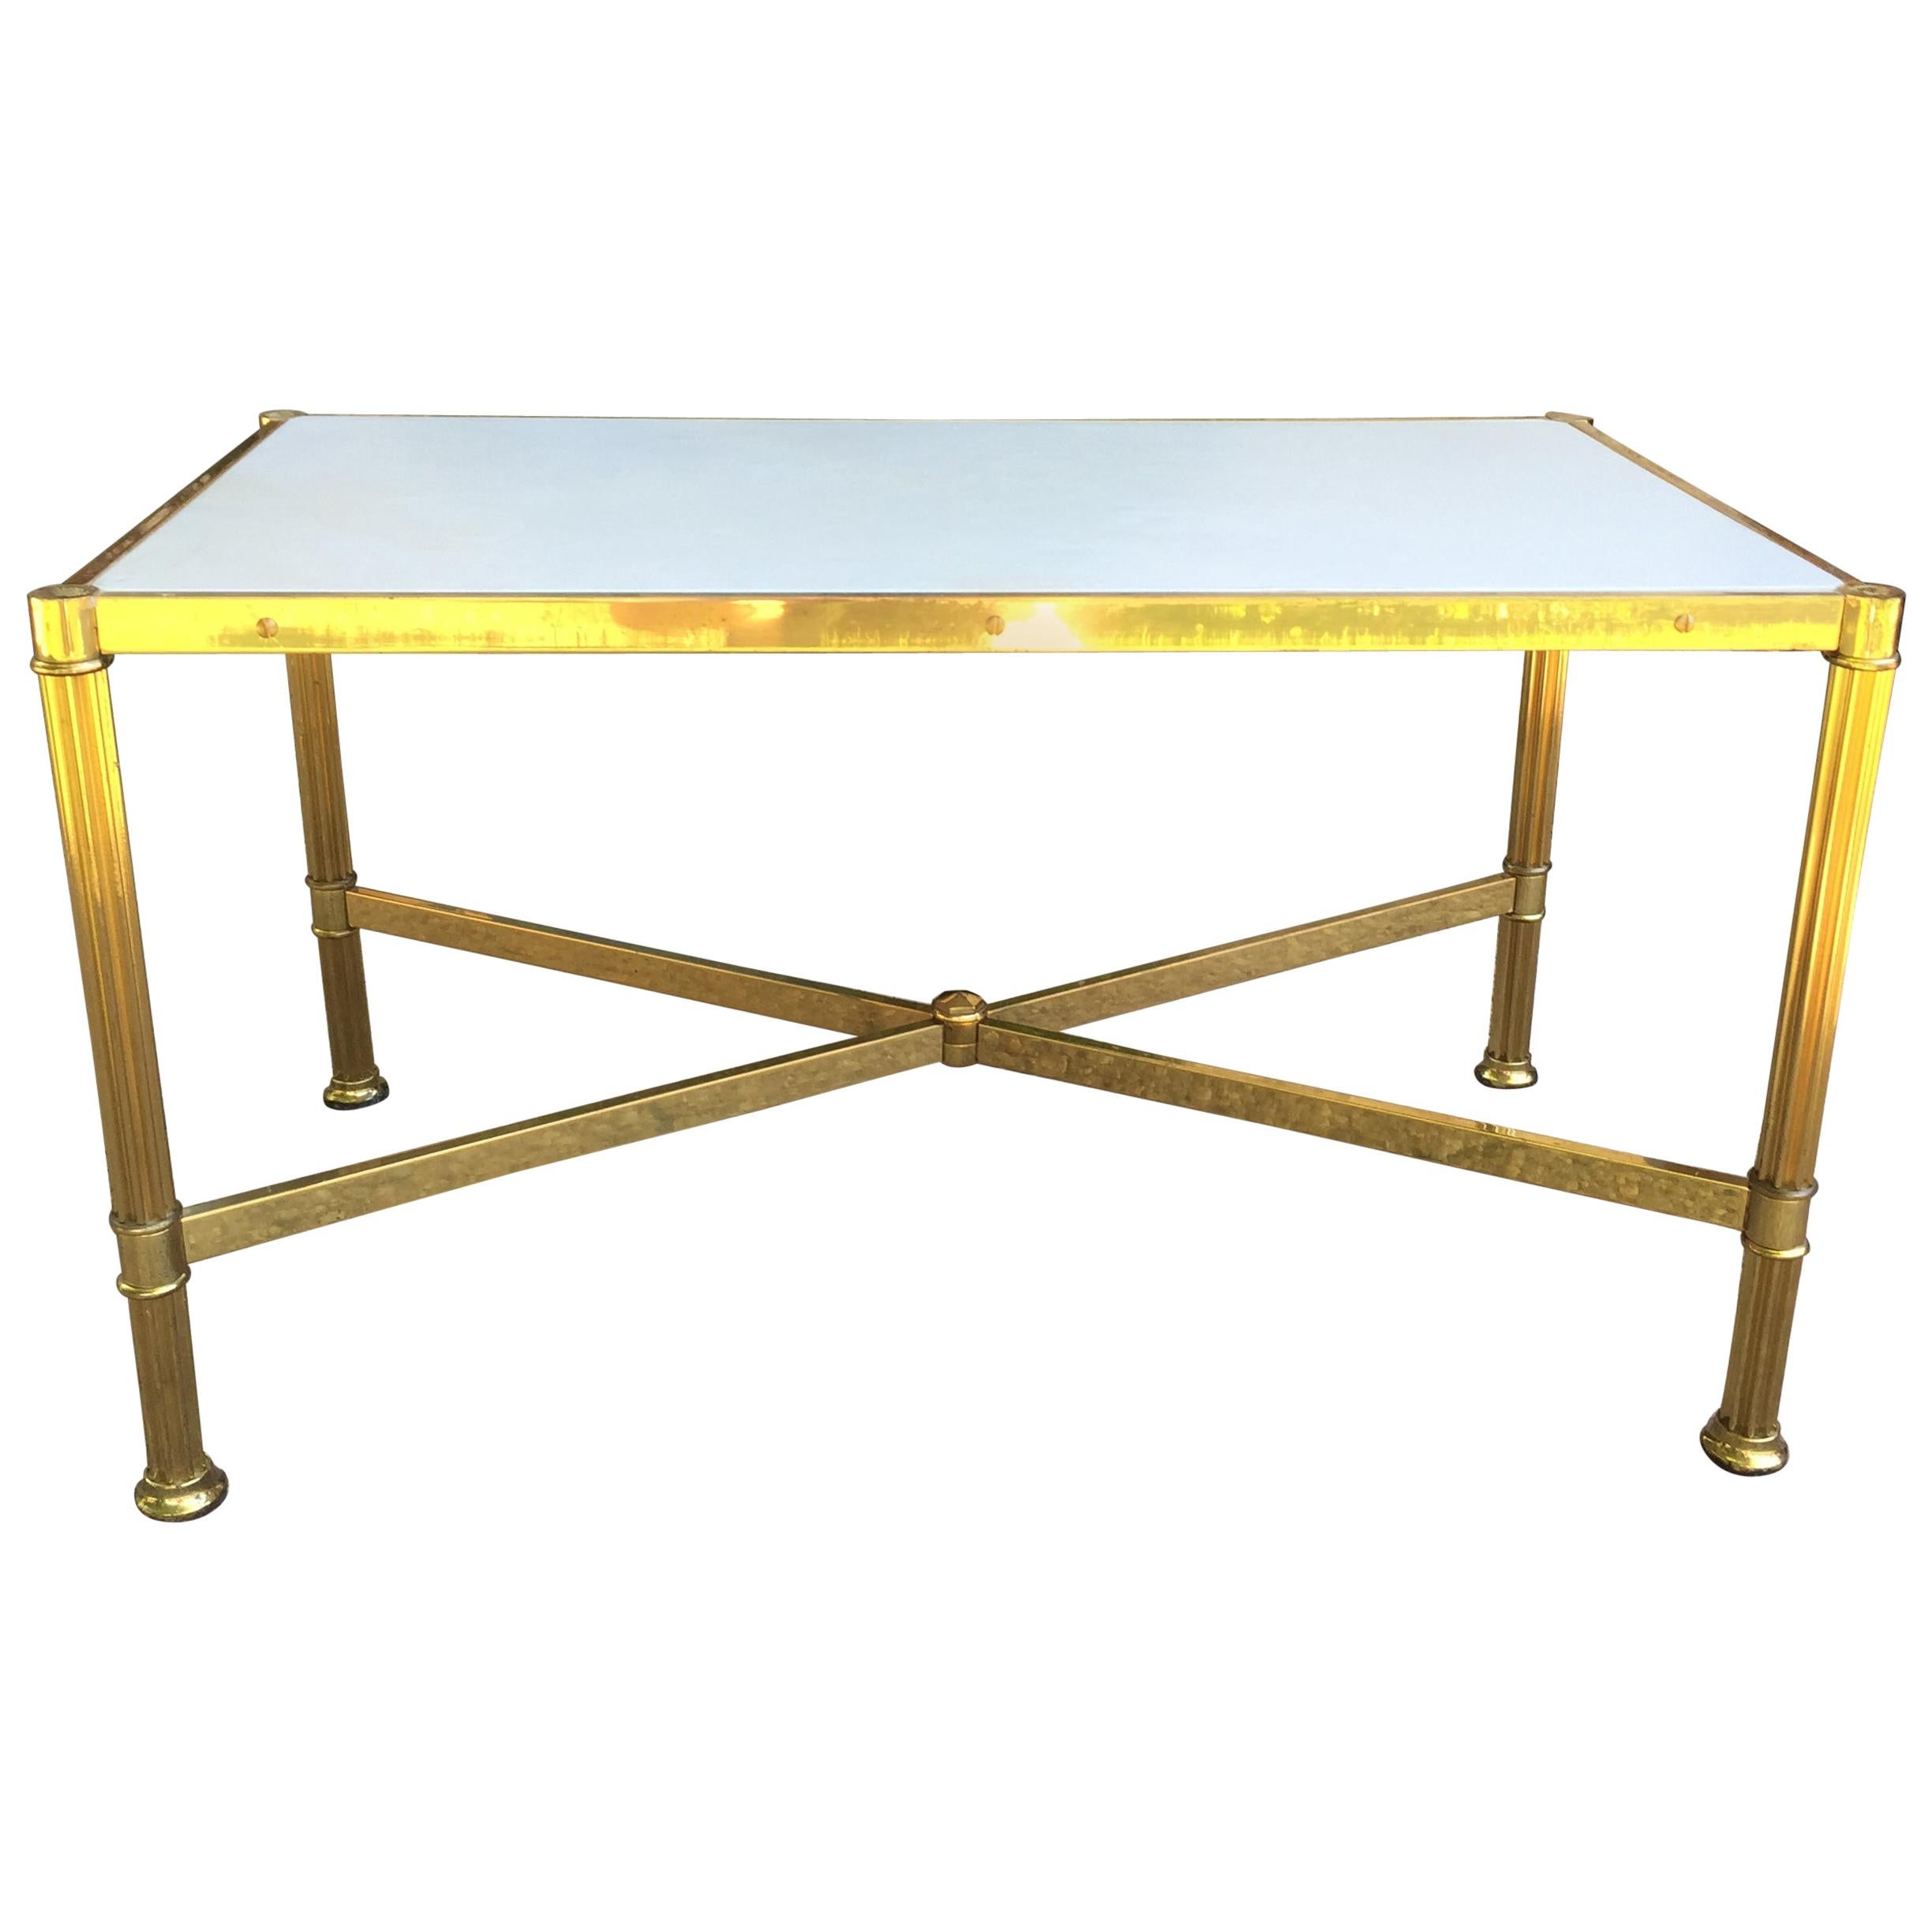 Italian 1960s Rectangular Side Table in Parchment and Brass, Attr. Maison Jansen